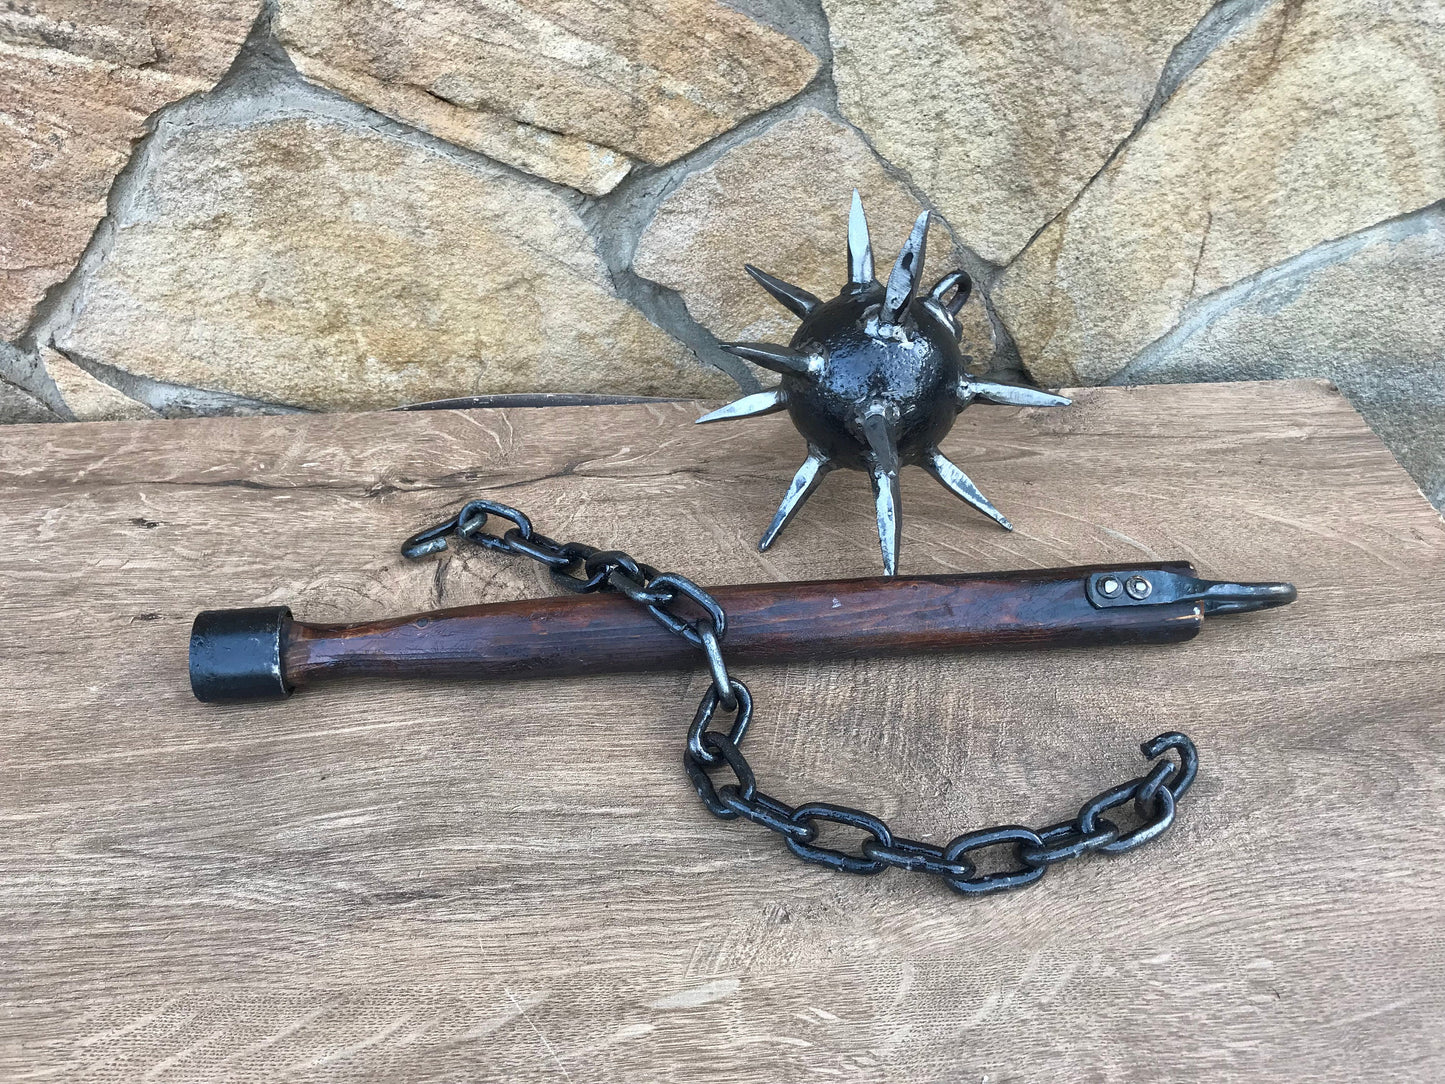 Viking mace, war mace, hand crafted mace, mace, flail, chain flail, medieval, knight,warrior,medieval weapon,viking axe,mens gifts,iron gift